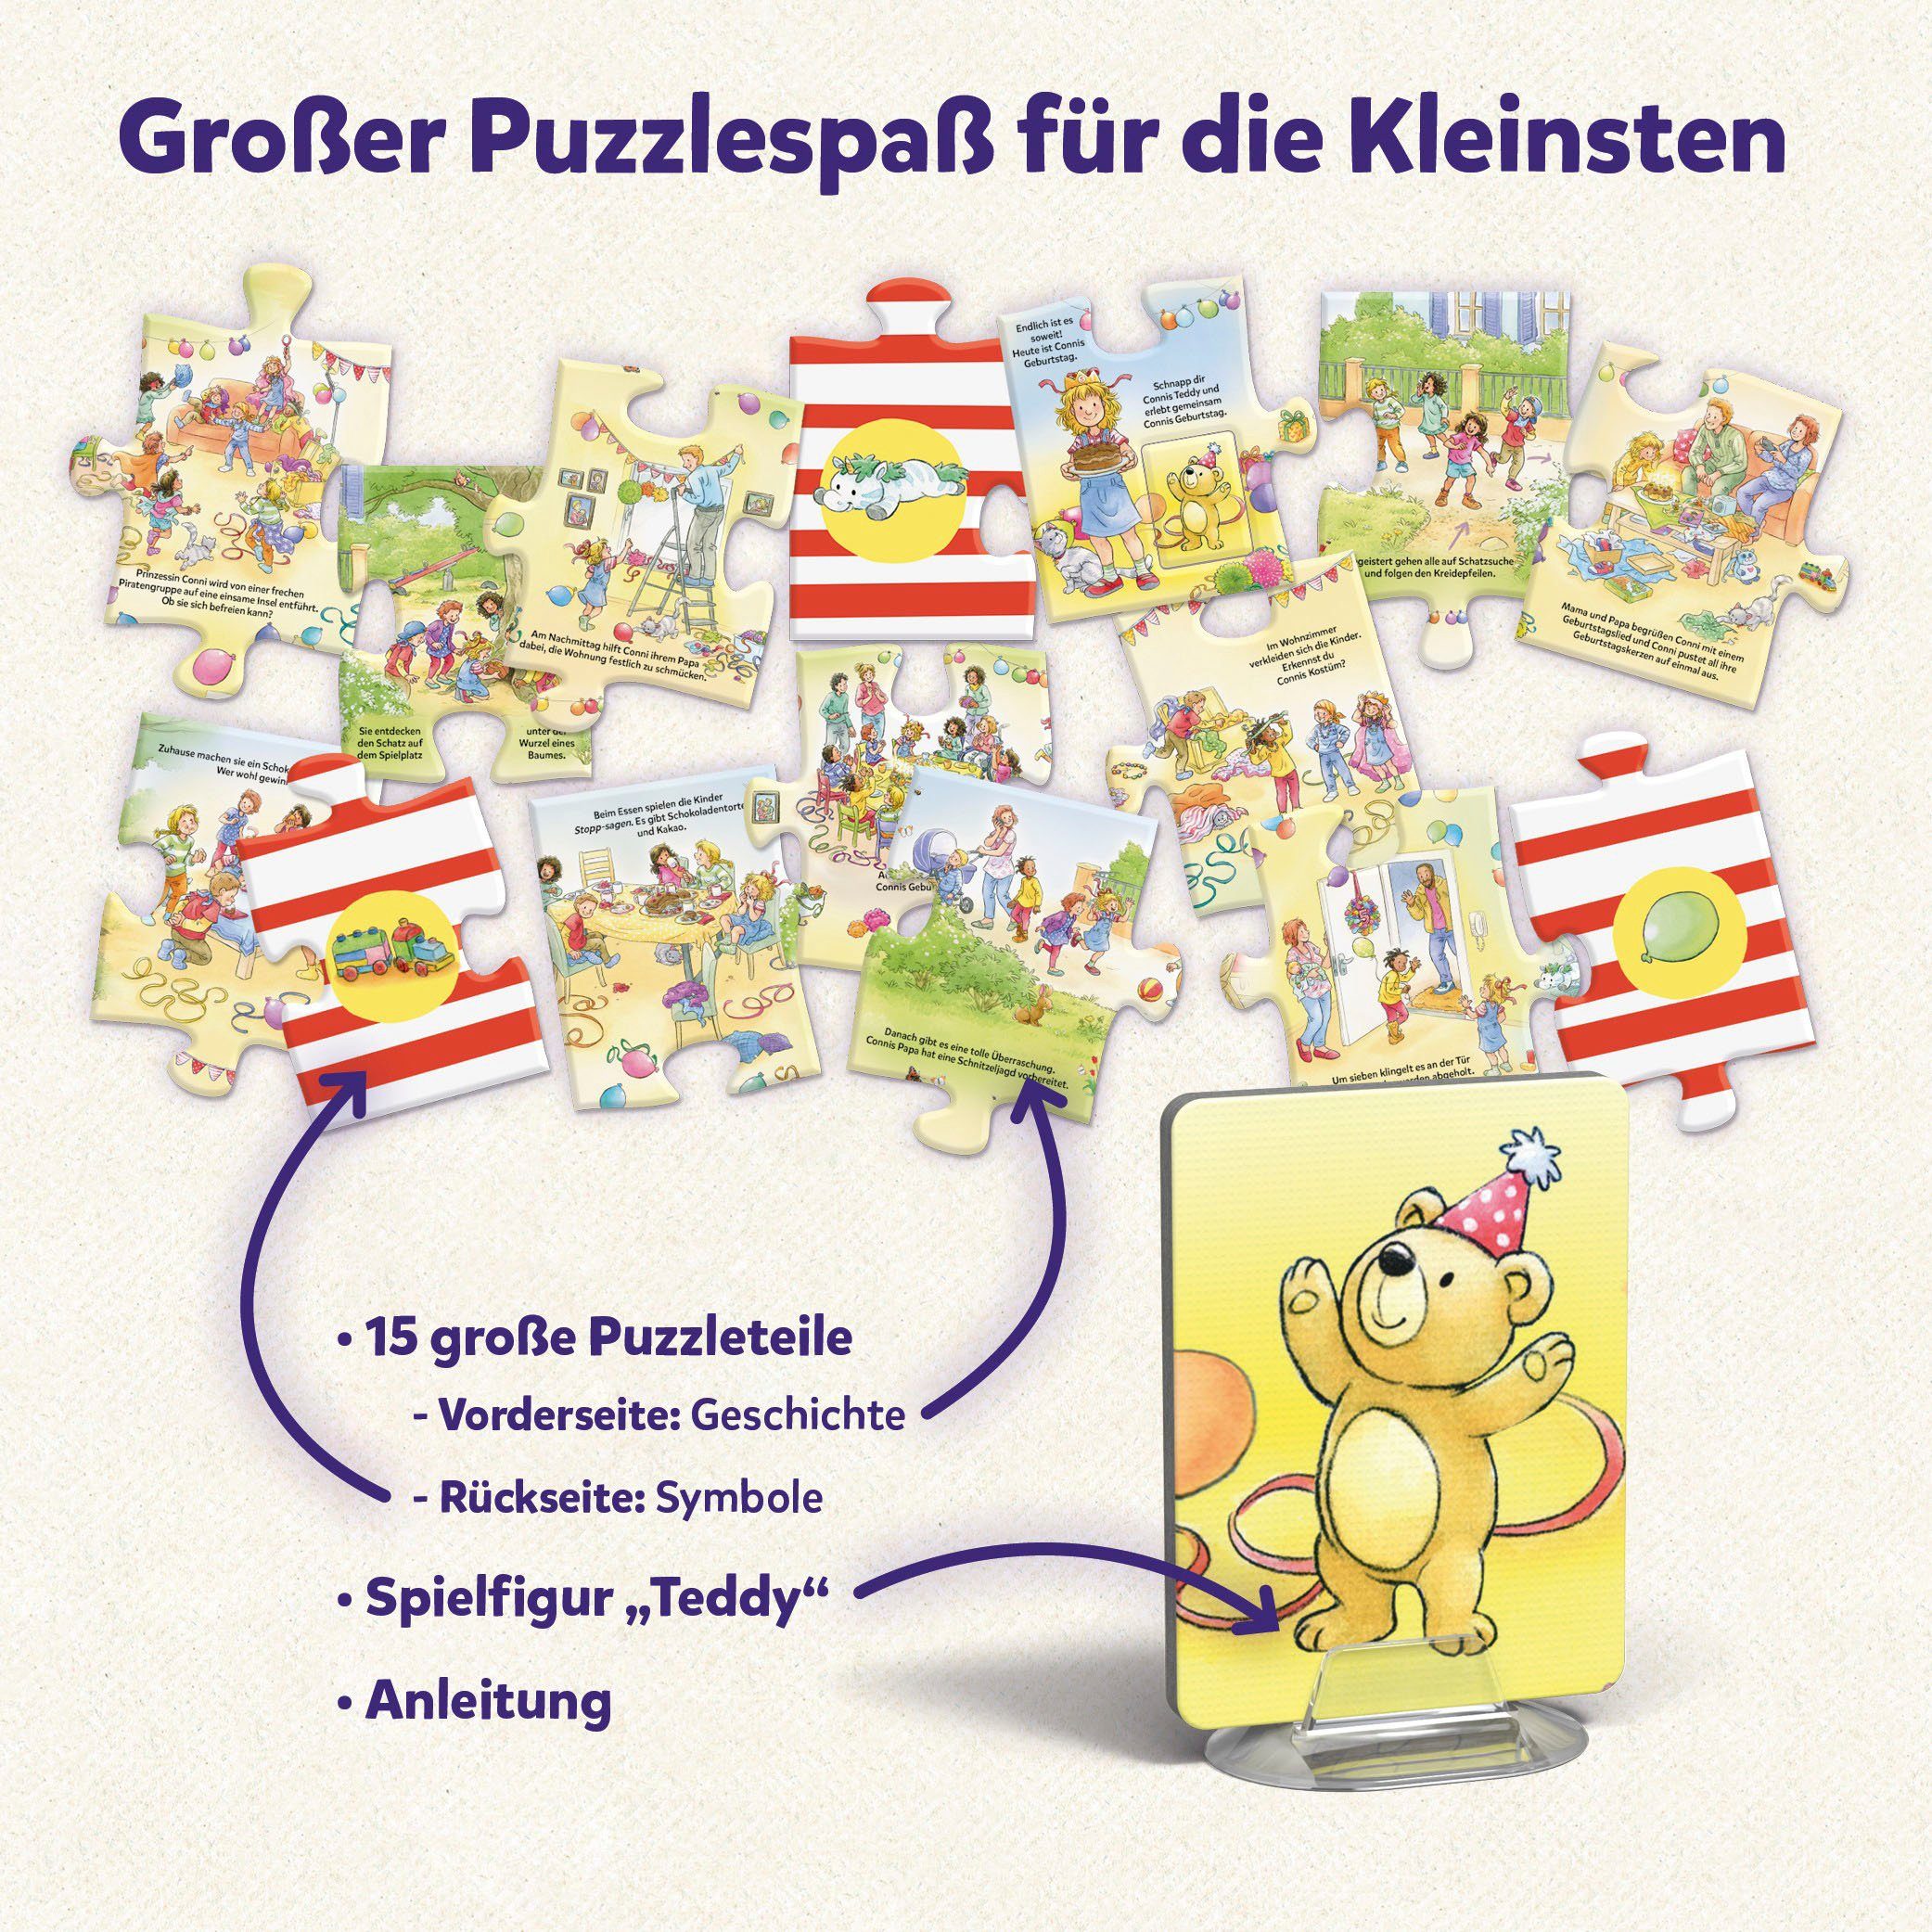 Kosmos Puzzle Mein Puzzleteile, Conni Made hat in Geburtstag, 15 Story-Puzzle erstes Germany 